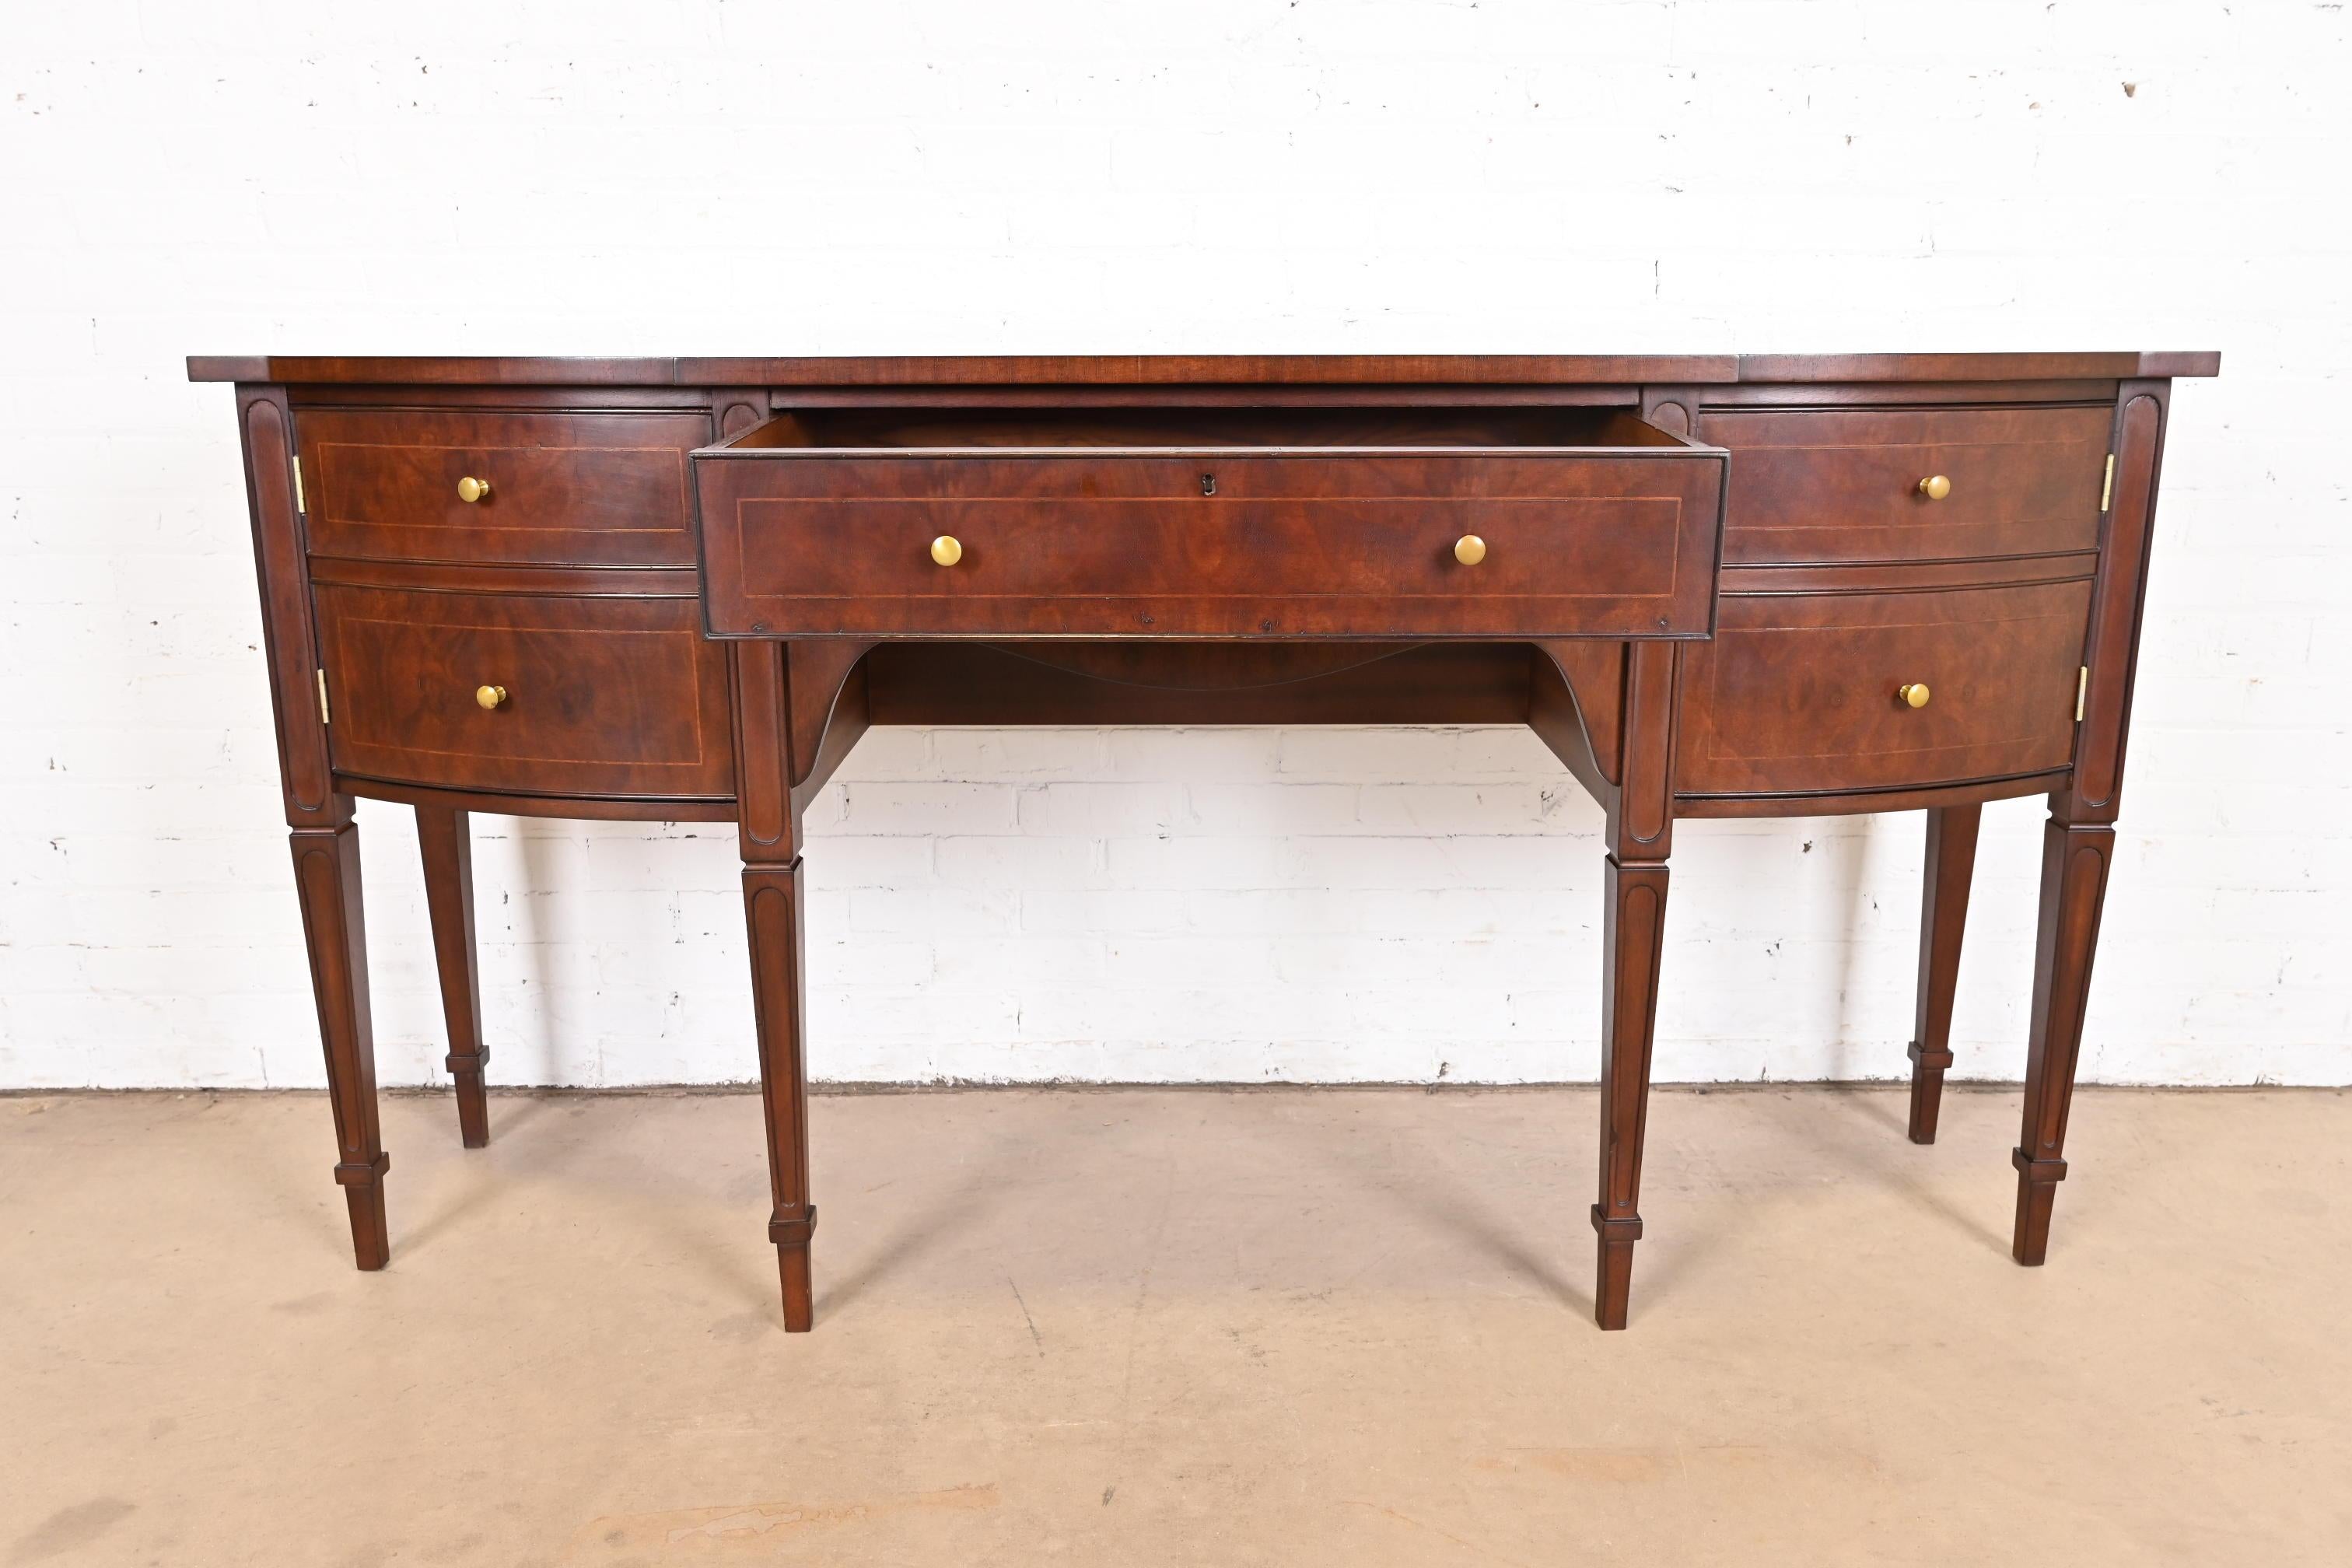 Baker Furniture Style Federal Inlaid Mahogany Sideboard Credenza For Sale 2